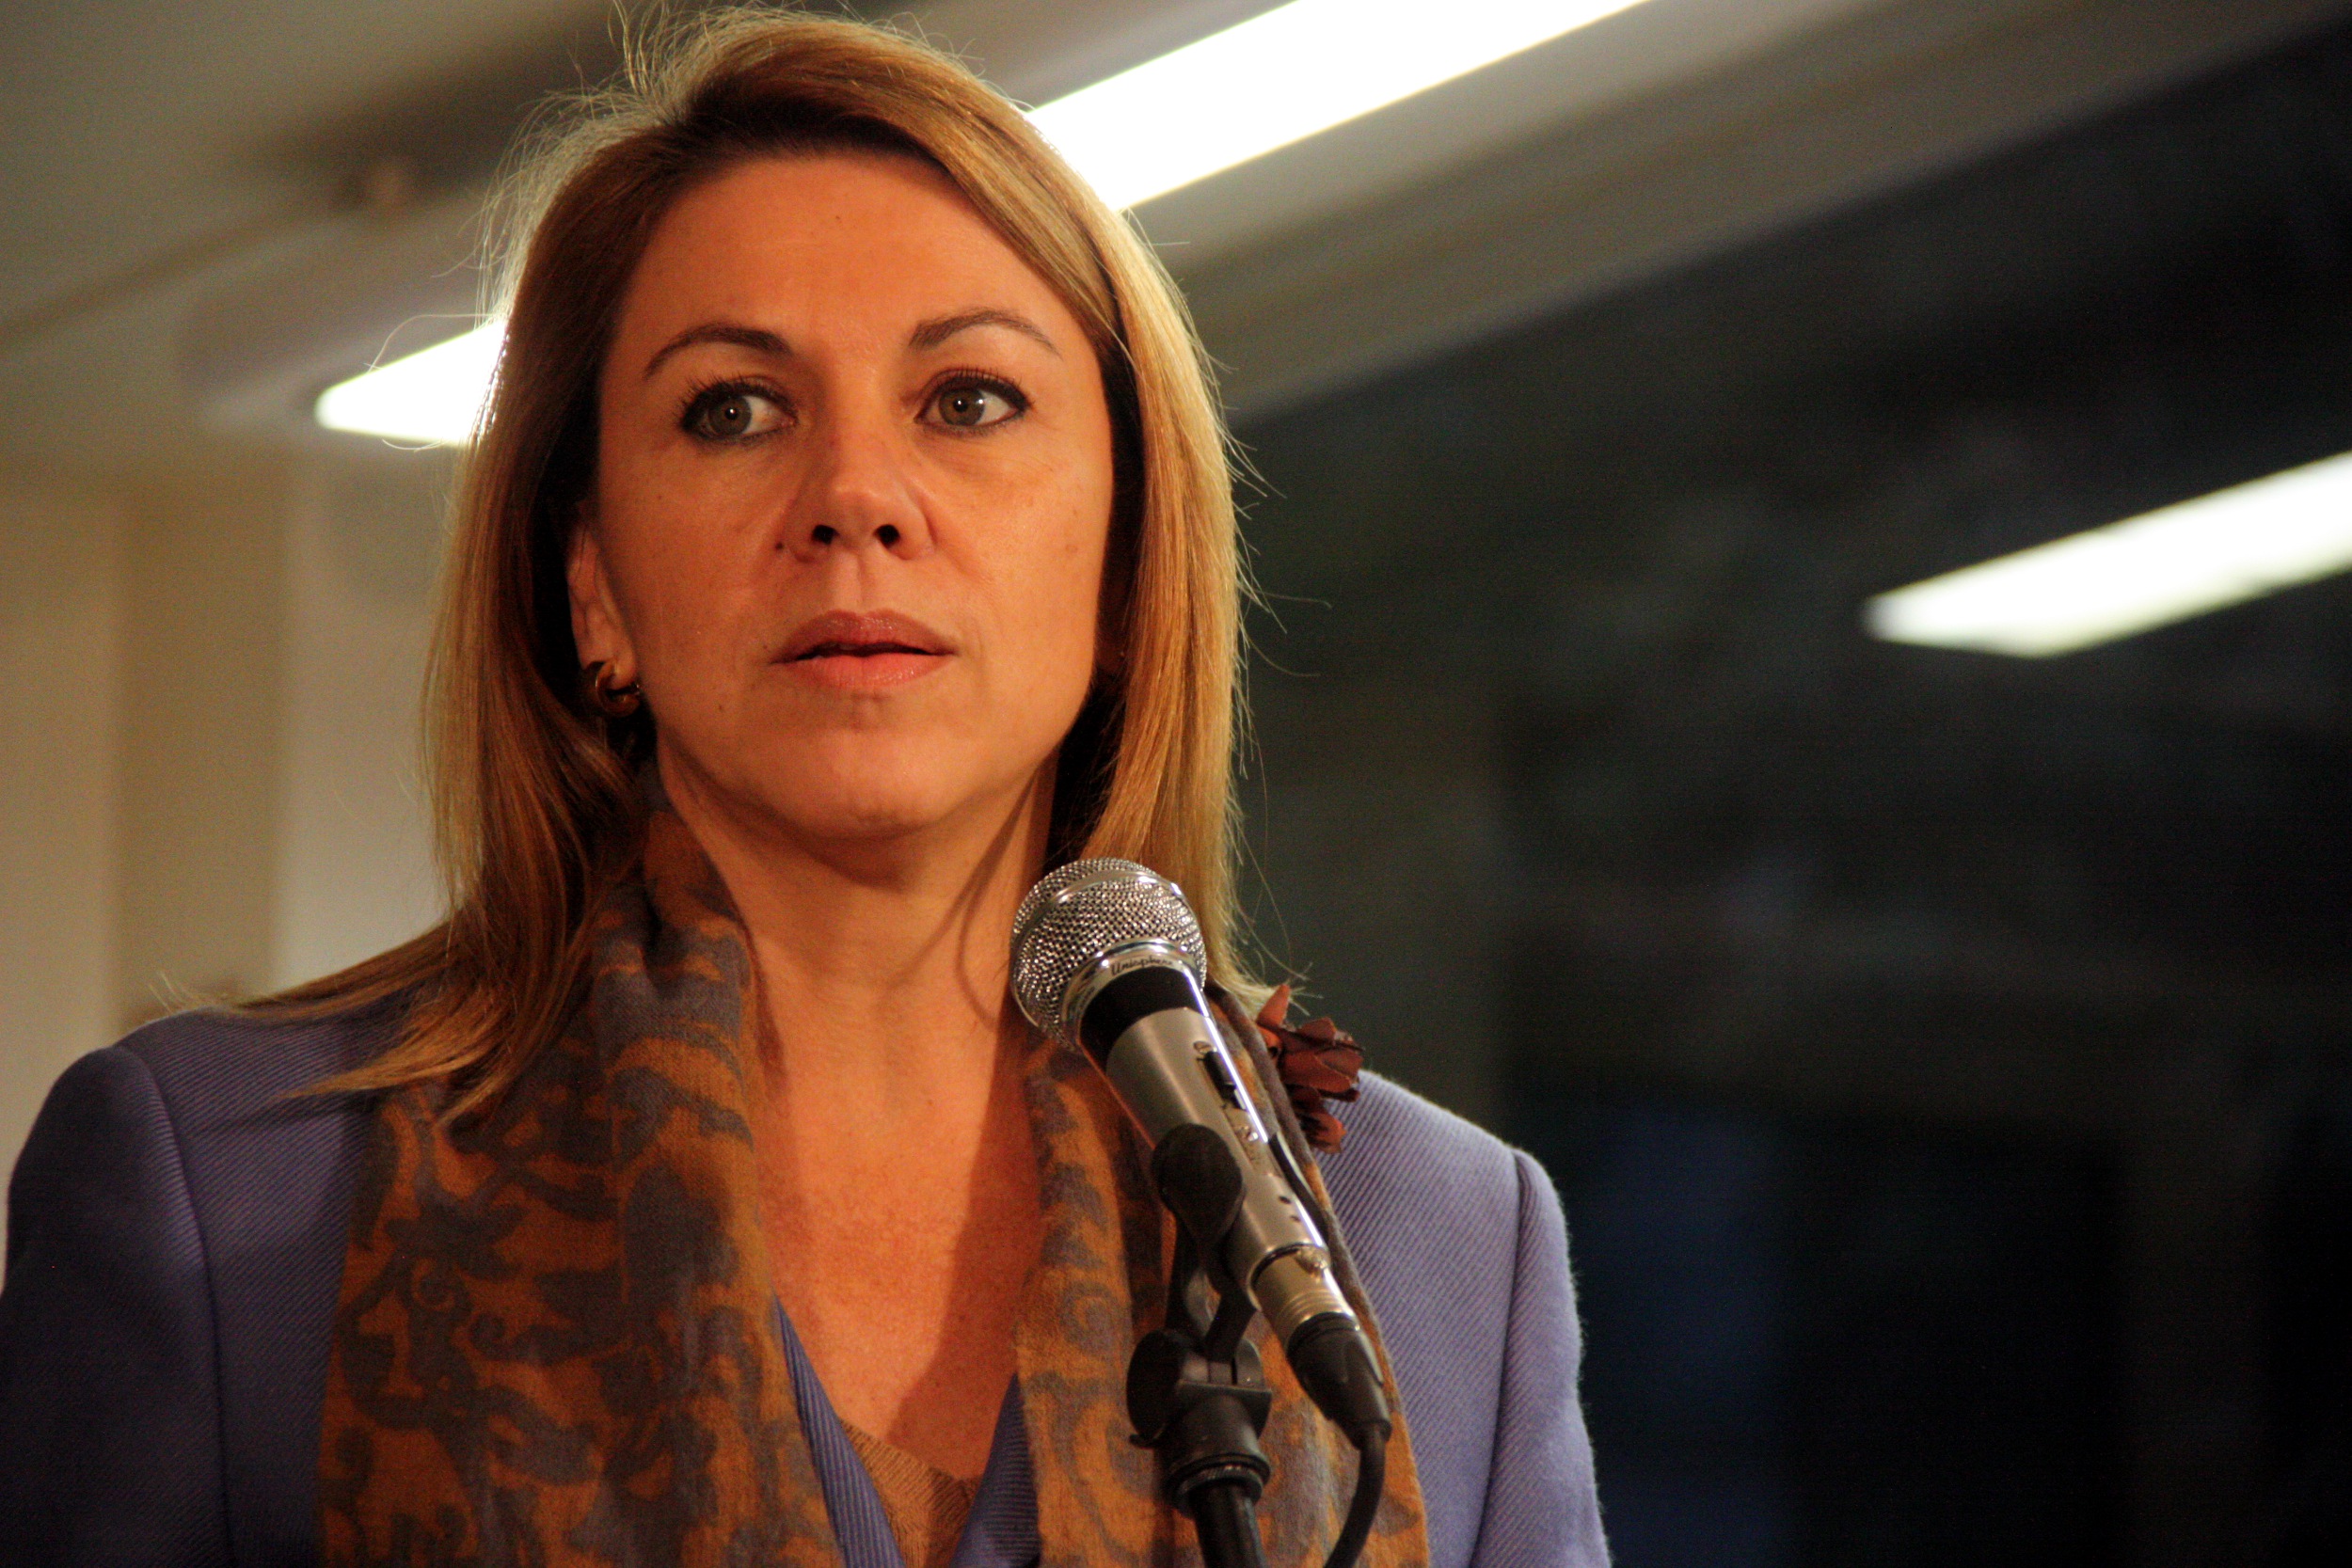 The Secretary General of the People's Party, María Dolores de Cospedal (by ACN)